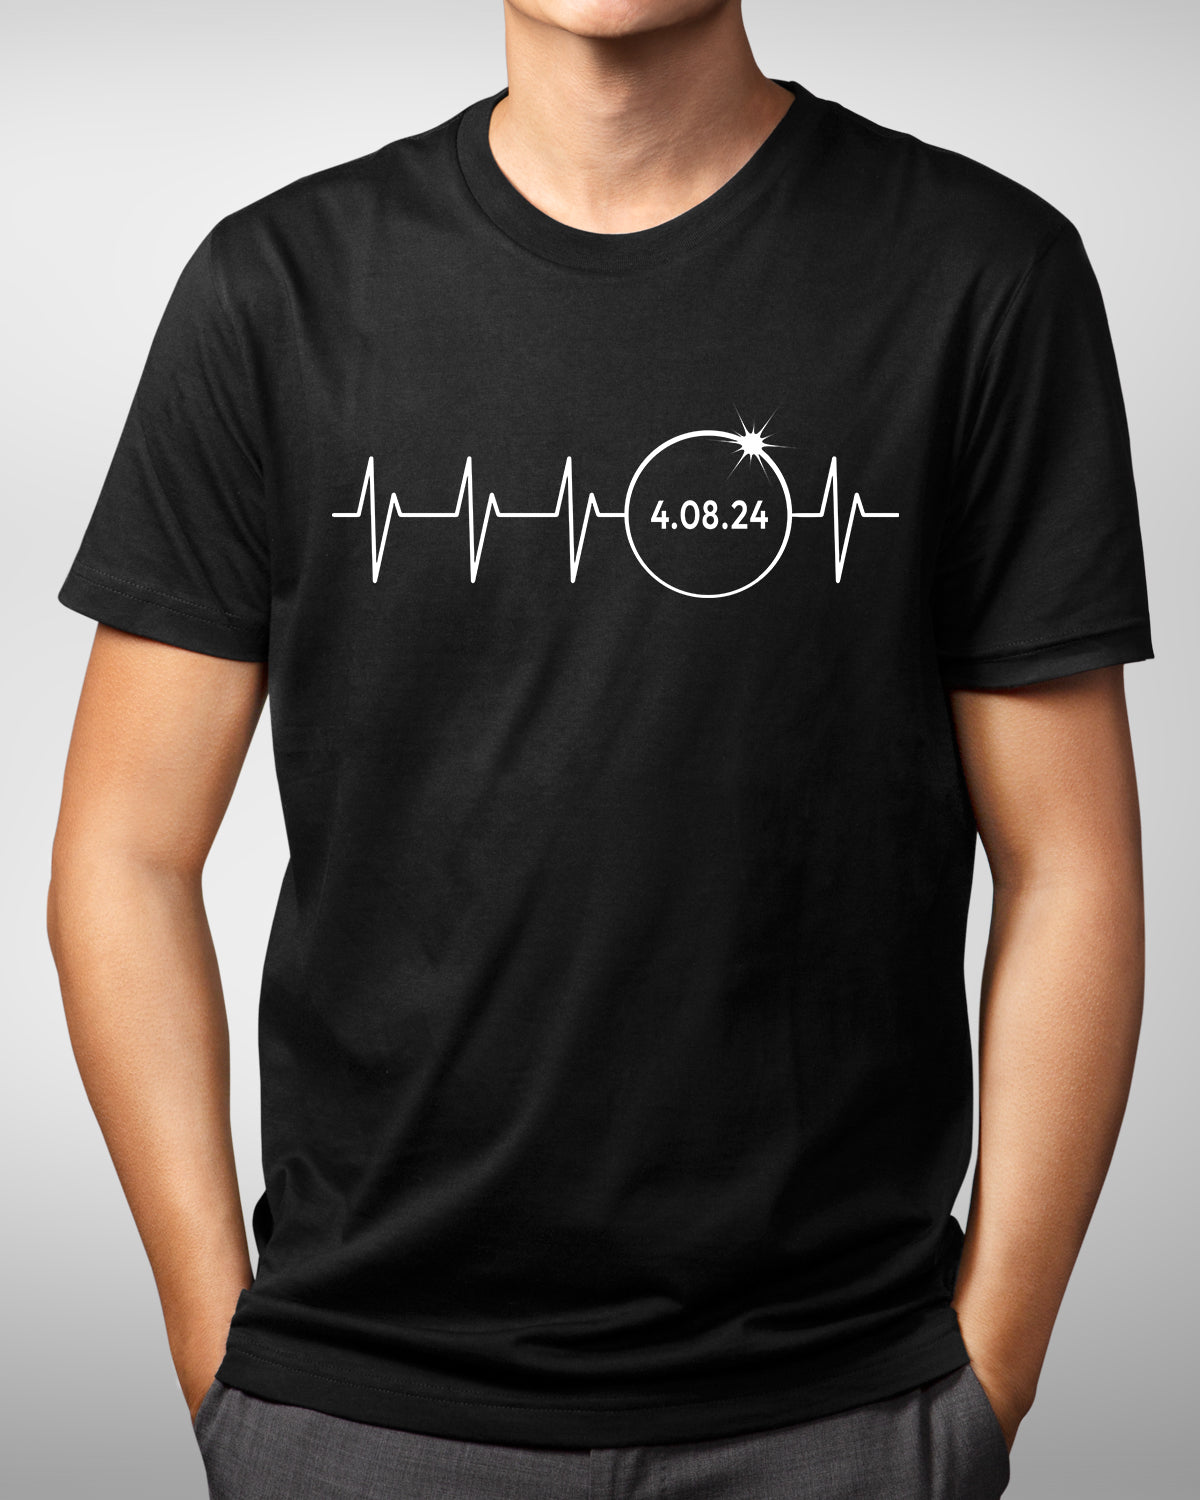 Total Solar Eclipse Heartbeat Pulse Shirt April 8, 2024, Funny Family Matching Astronomy Tee, Spring Eclipse Souvenir, Totality 4.08.24 Gift